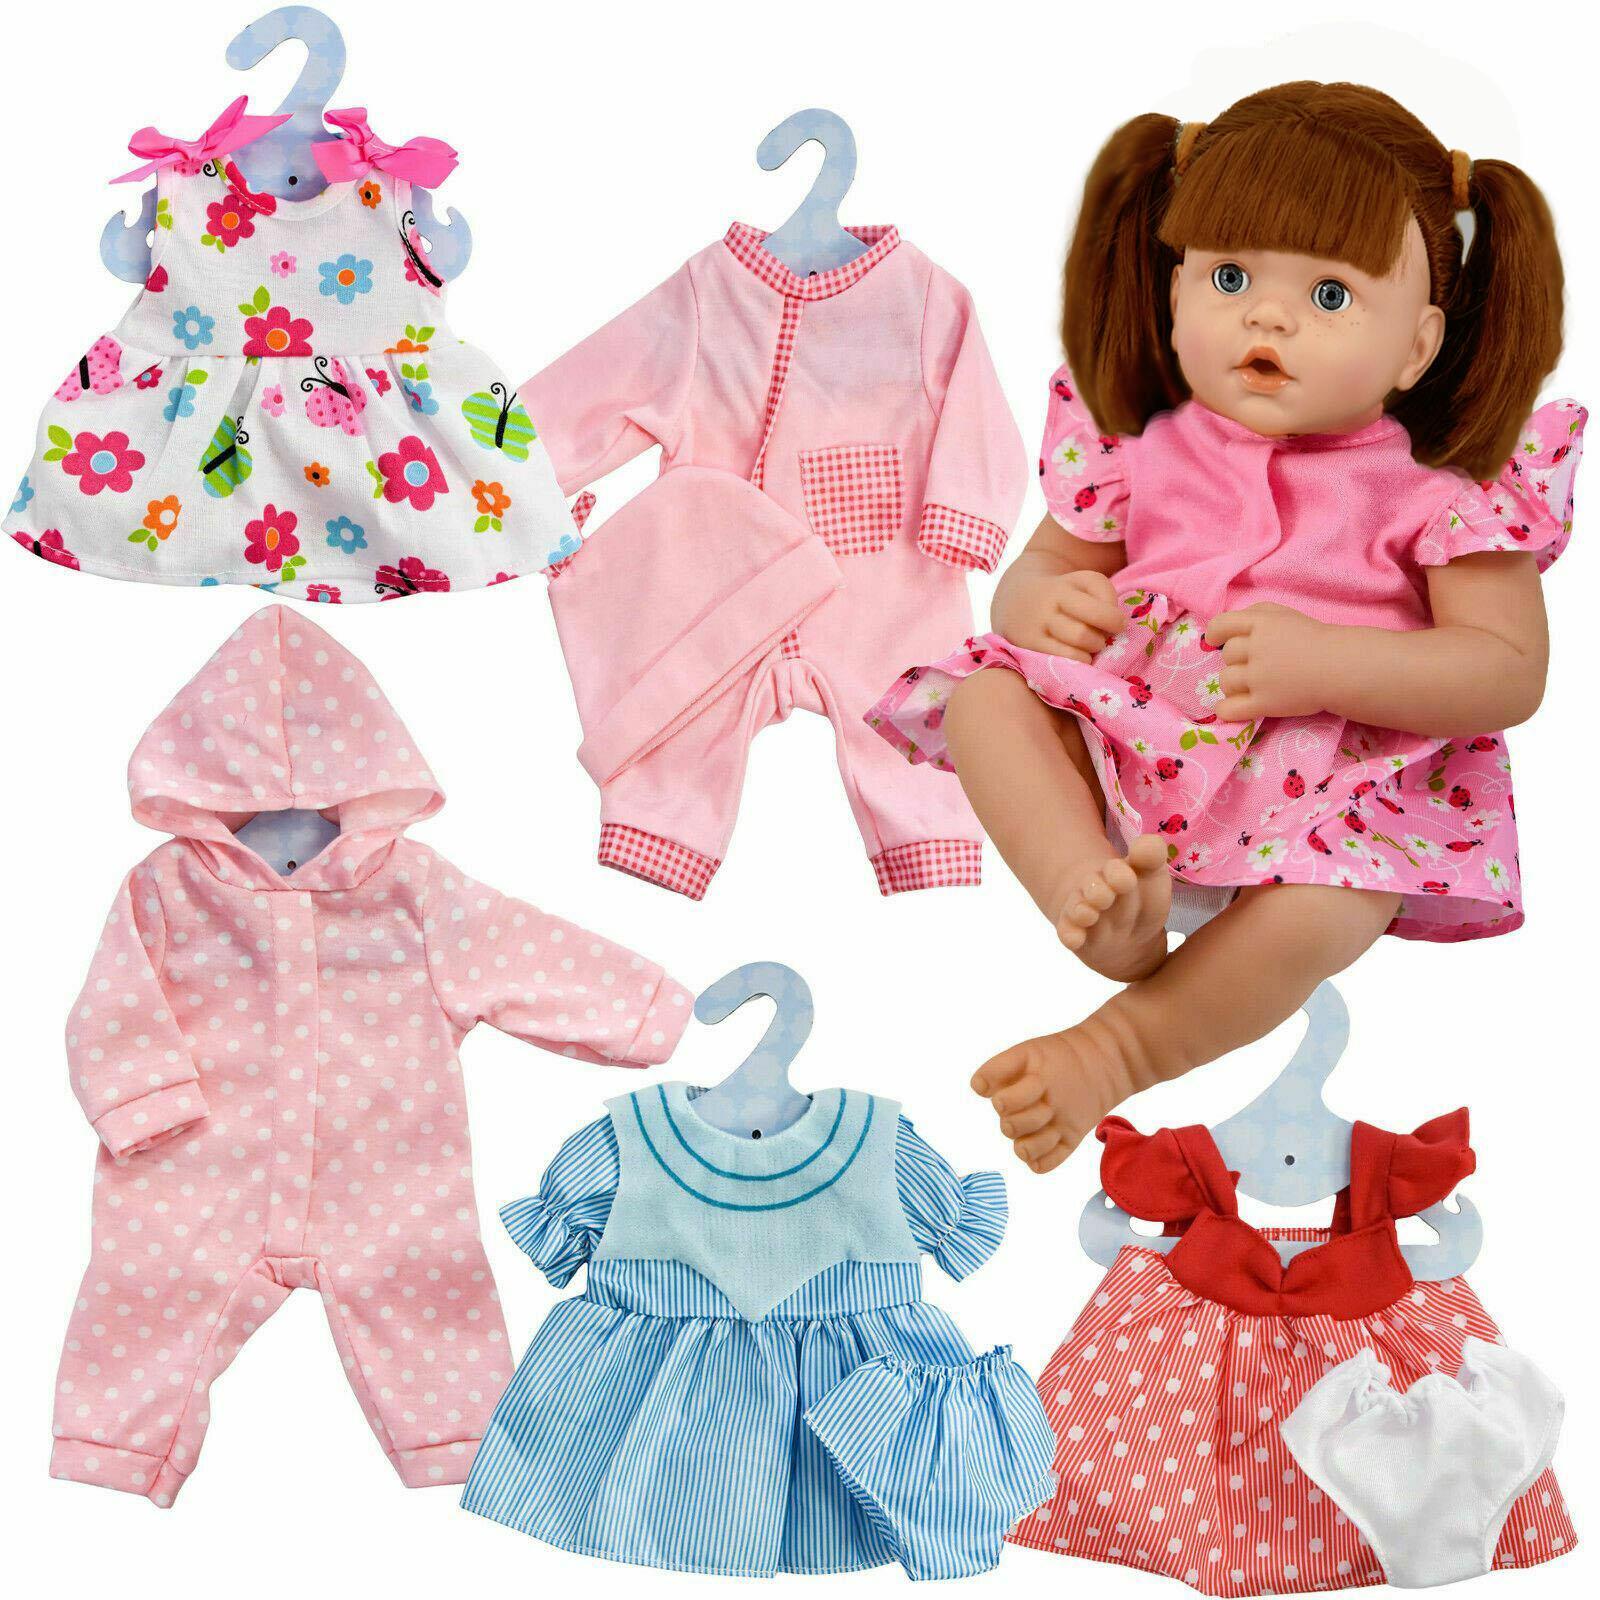 Baby Doll Clothes Set of 6 for Dolls 12-16" by BiBi Doll - The Magic Toy Shop